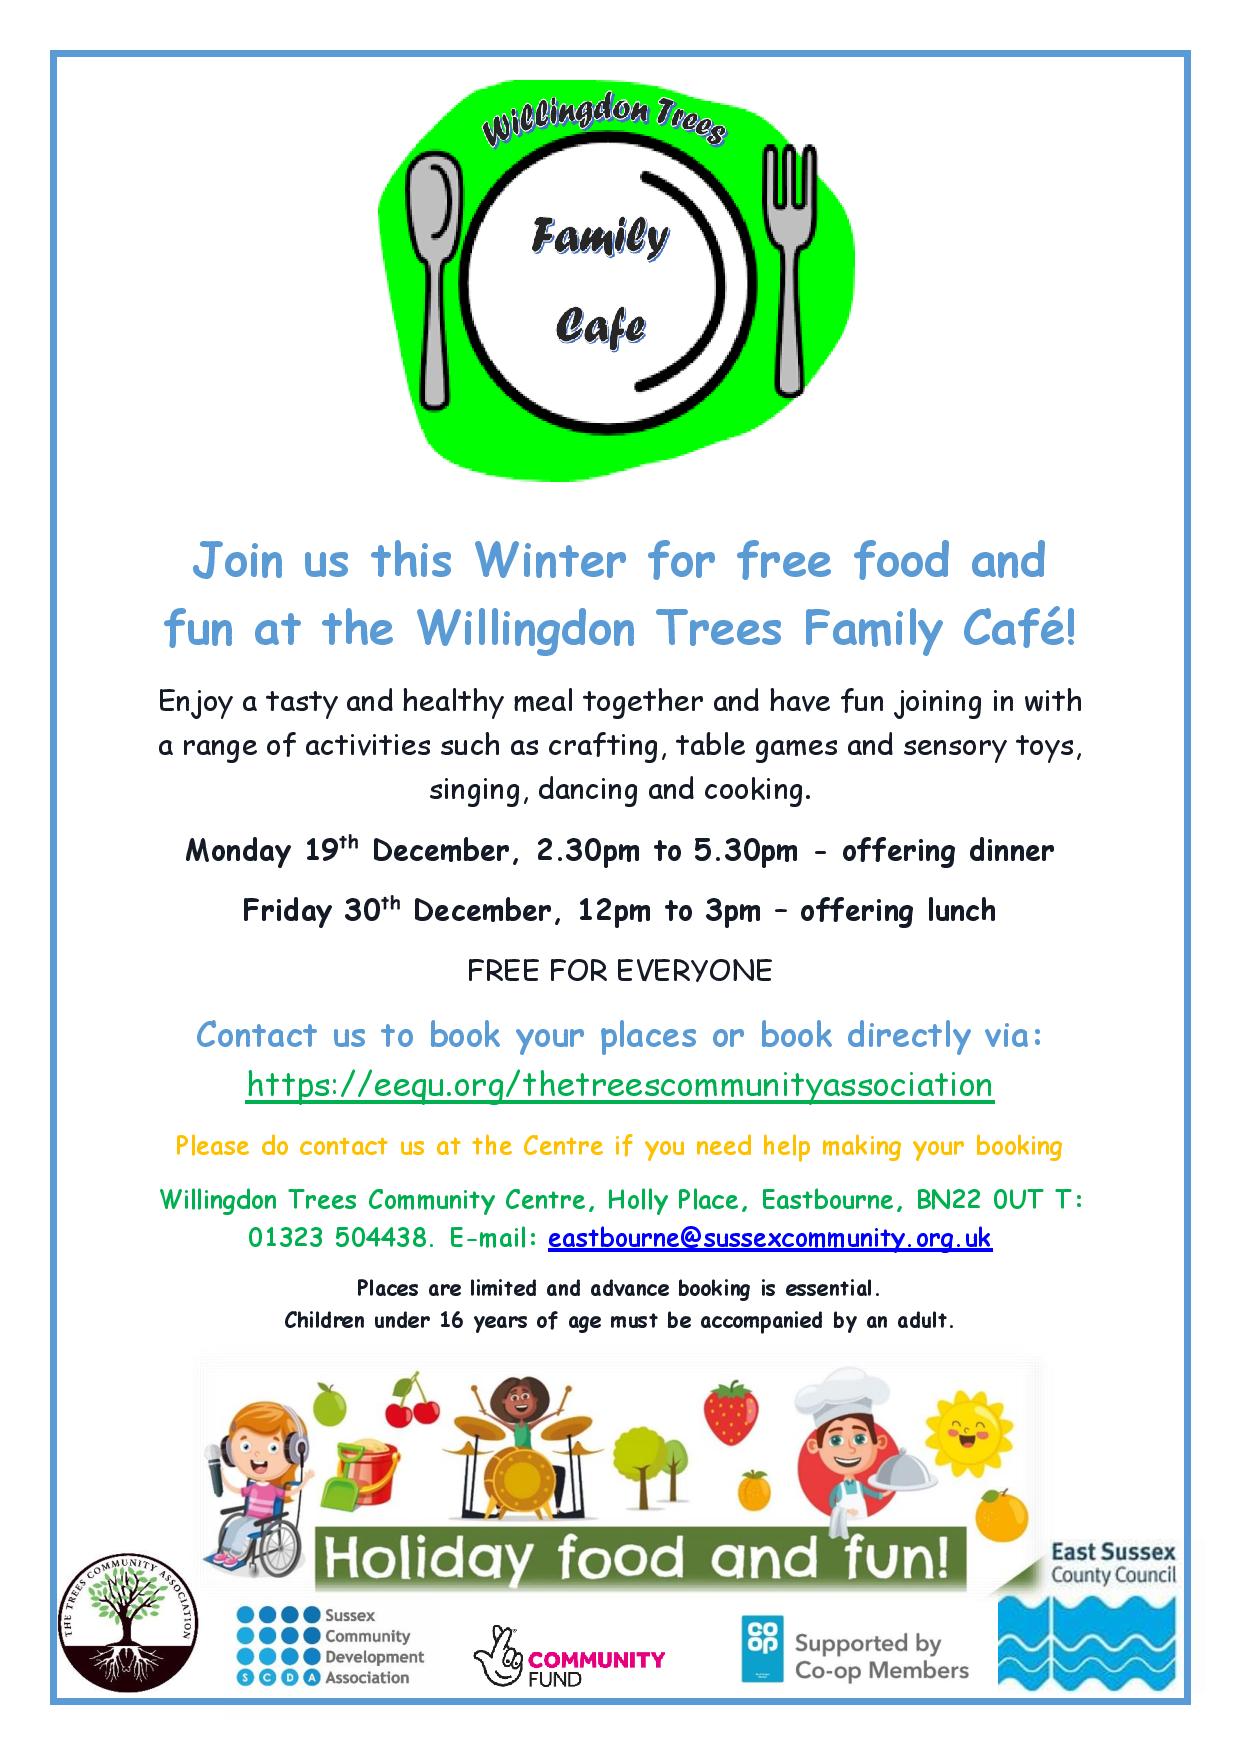 Family cafe poster for December sessions at Willingdon Trees community centre